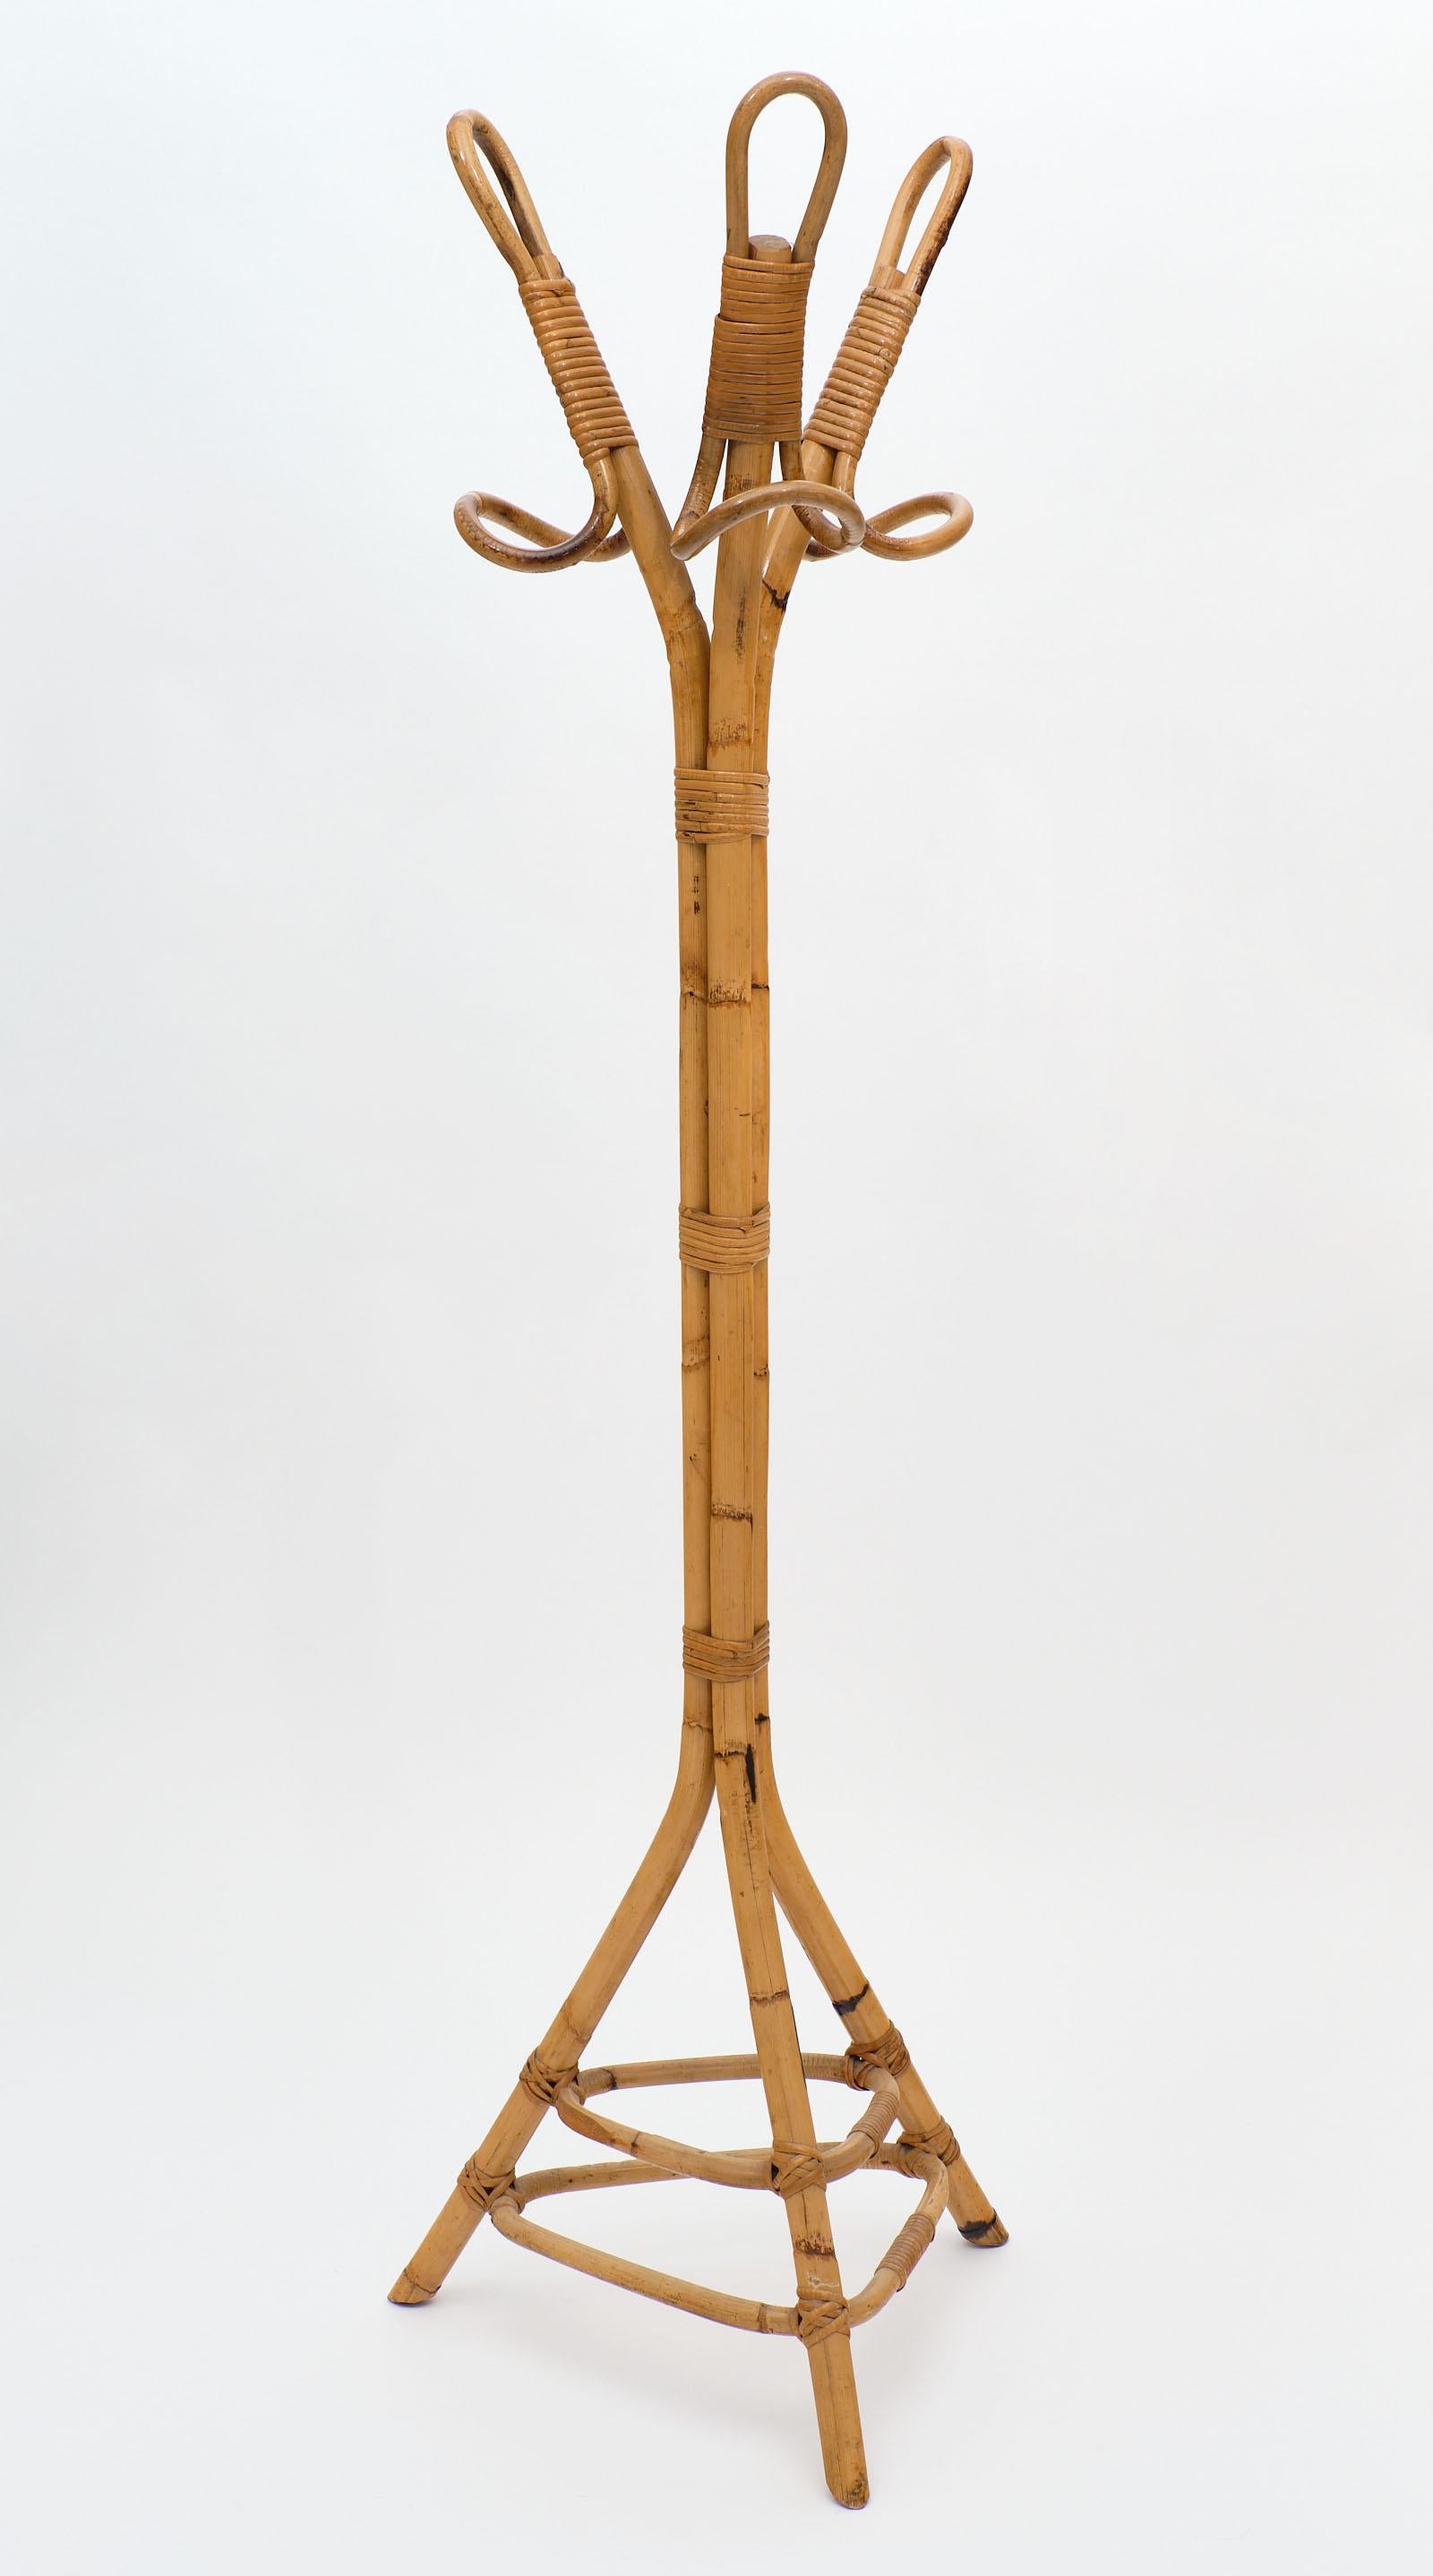 Vintage bamboo French coat rack with a tripod base. We love the sculptural elements of this piece and the strong impact it has!